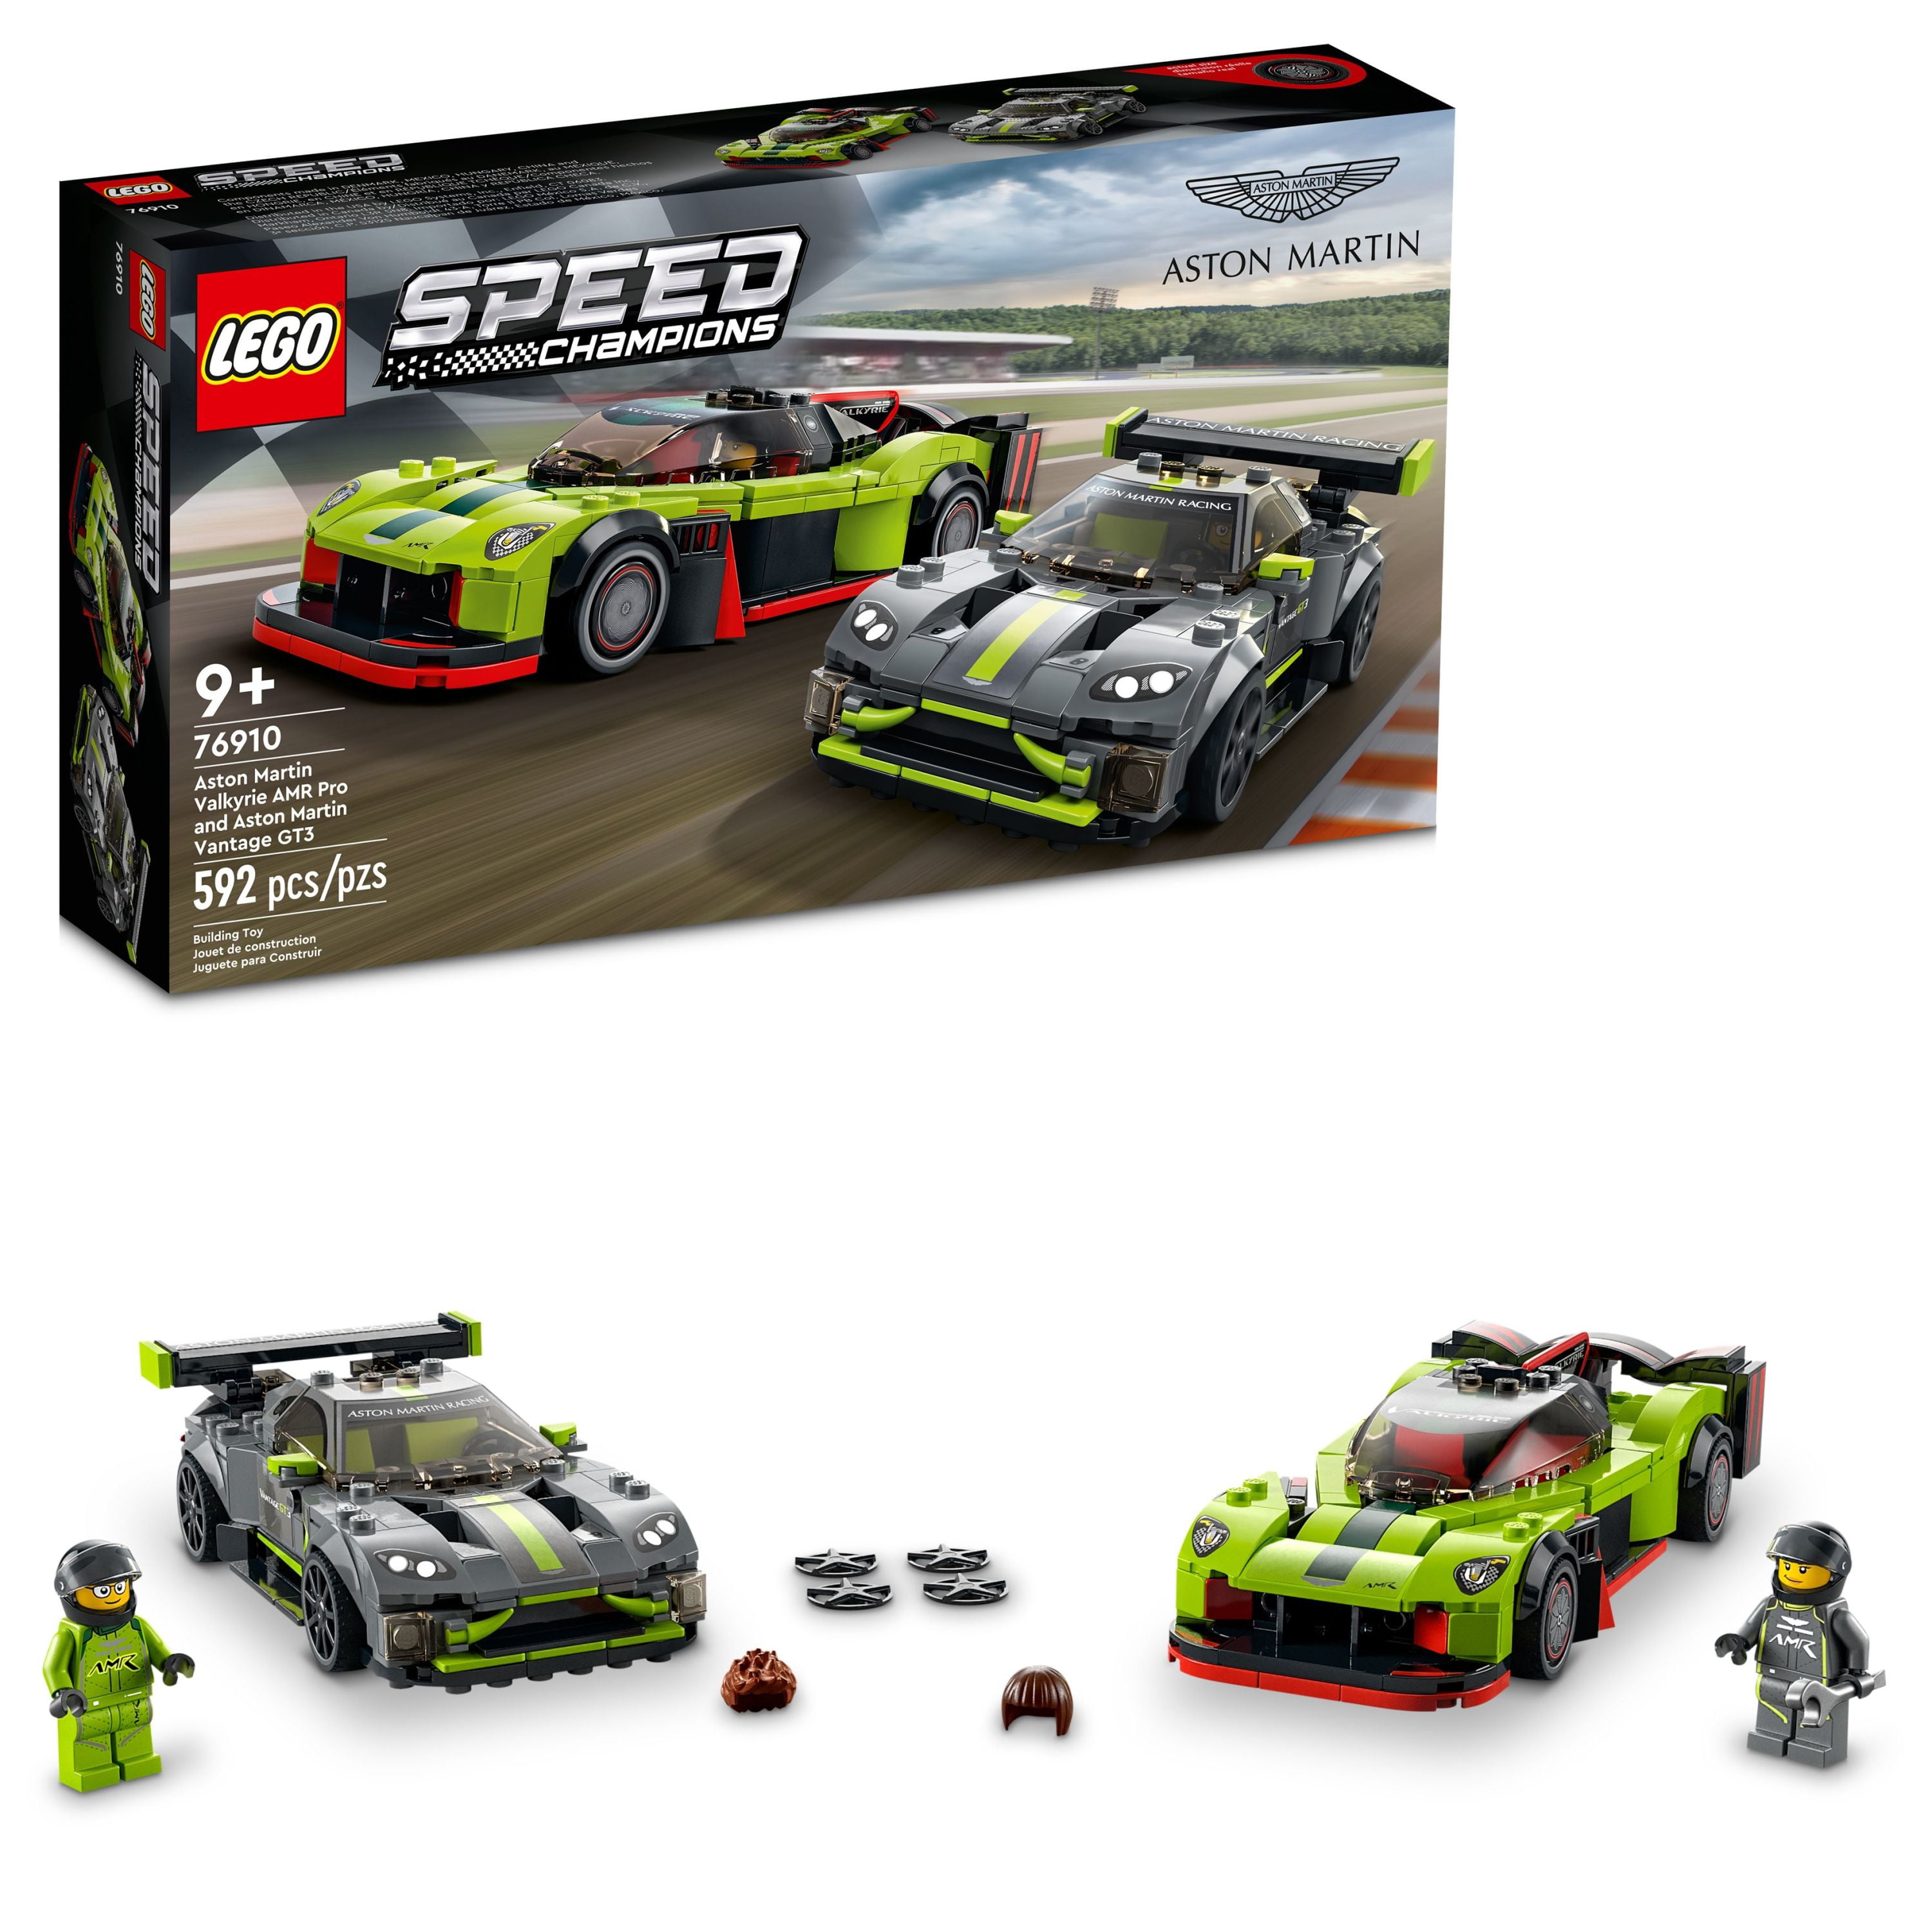 LEGO Speed Champions Aston Martin Valkyrie AMR Pro & Vantage GT3 2 76910 Race Car Toys, Collectible Cars Models Set, 2022 Collection